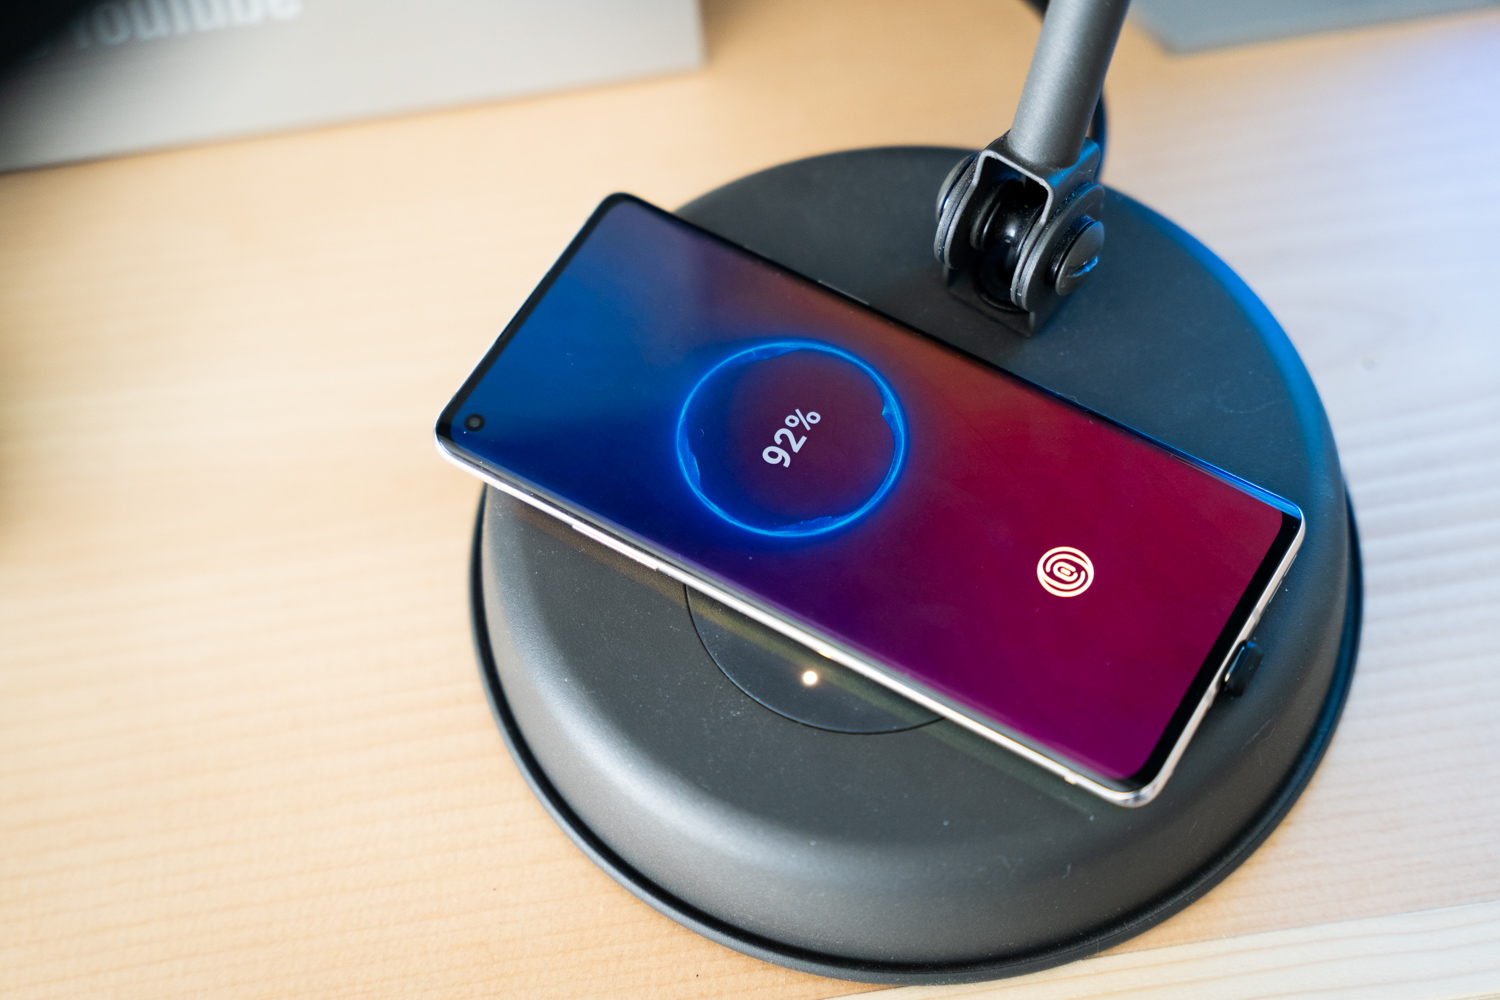 Qi2 wireless charging will be launching in time for the holidays